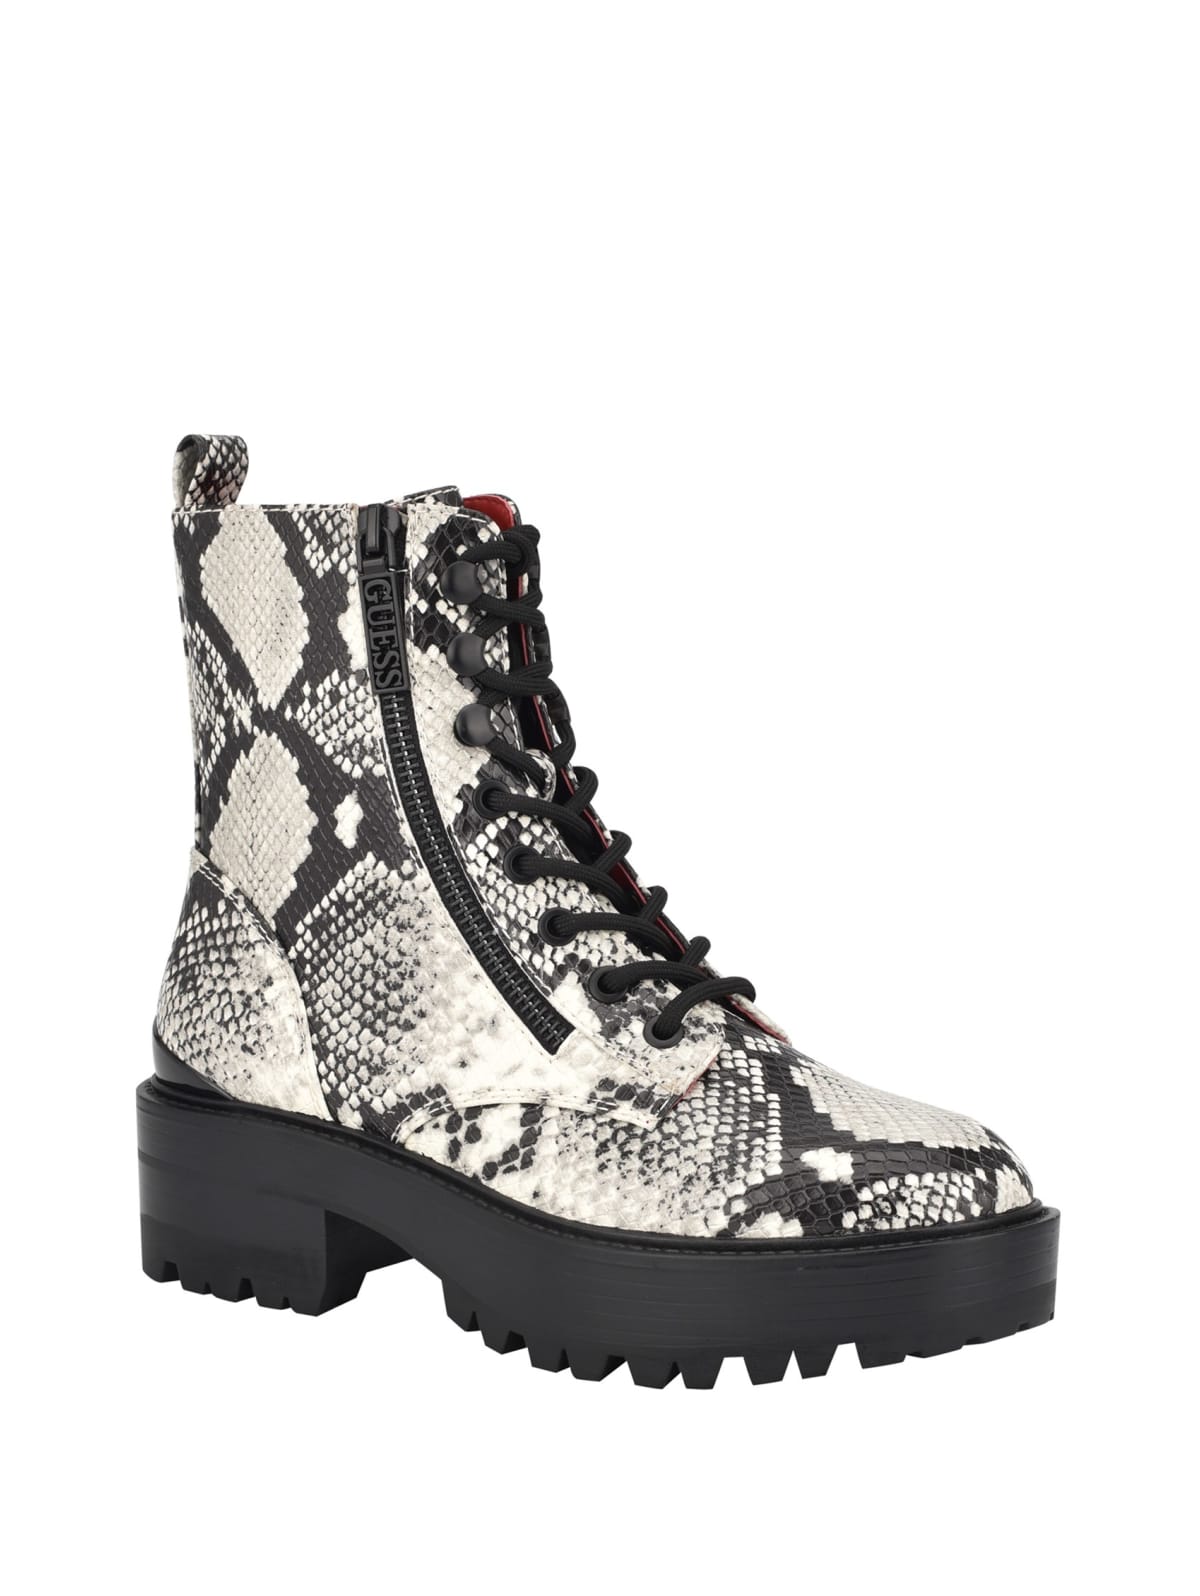 omhyggeligt Creep sortie Guess Boots Canada Finland, SAVE 43% - motorhomevoyager.co.uk